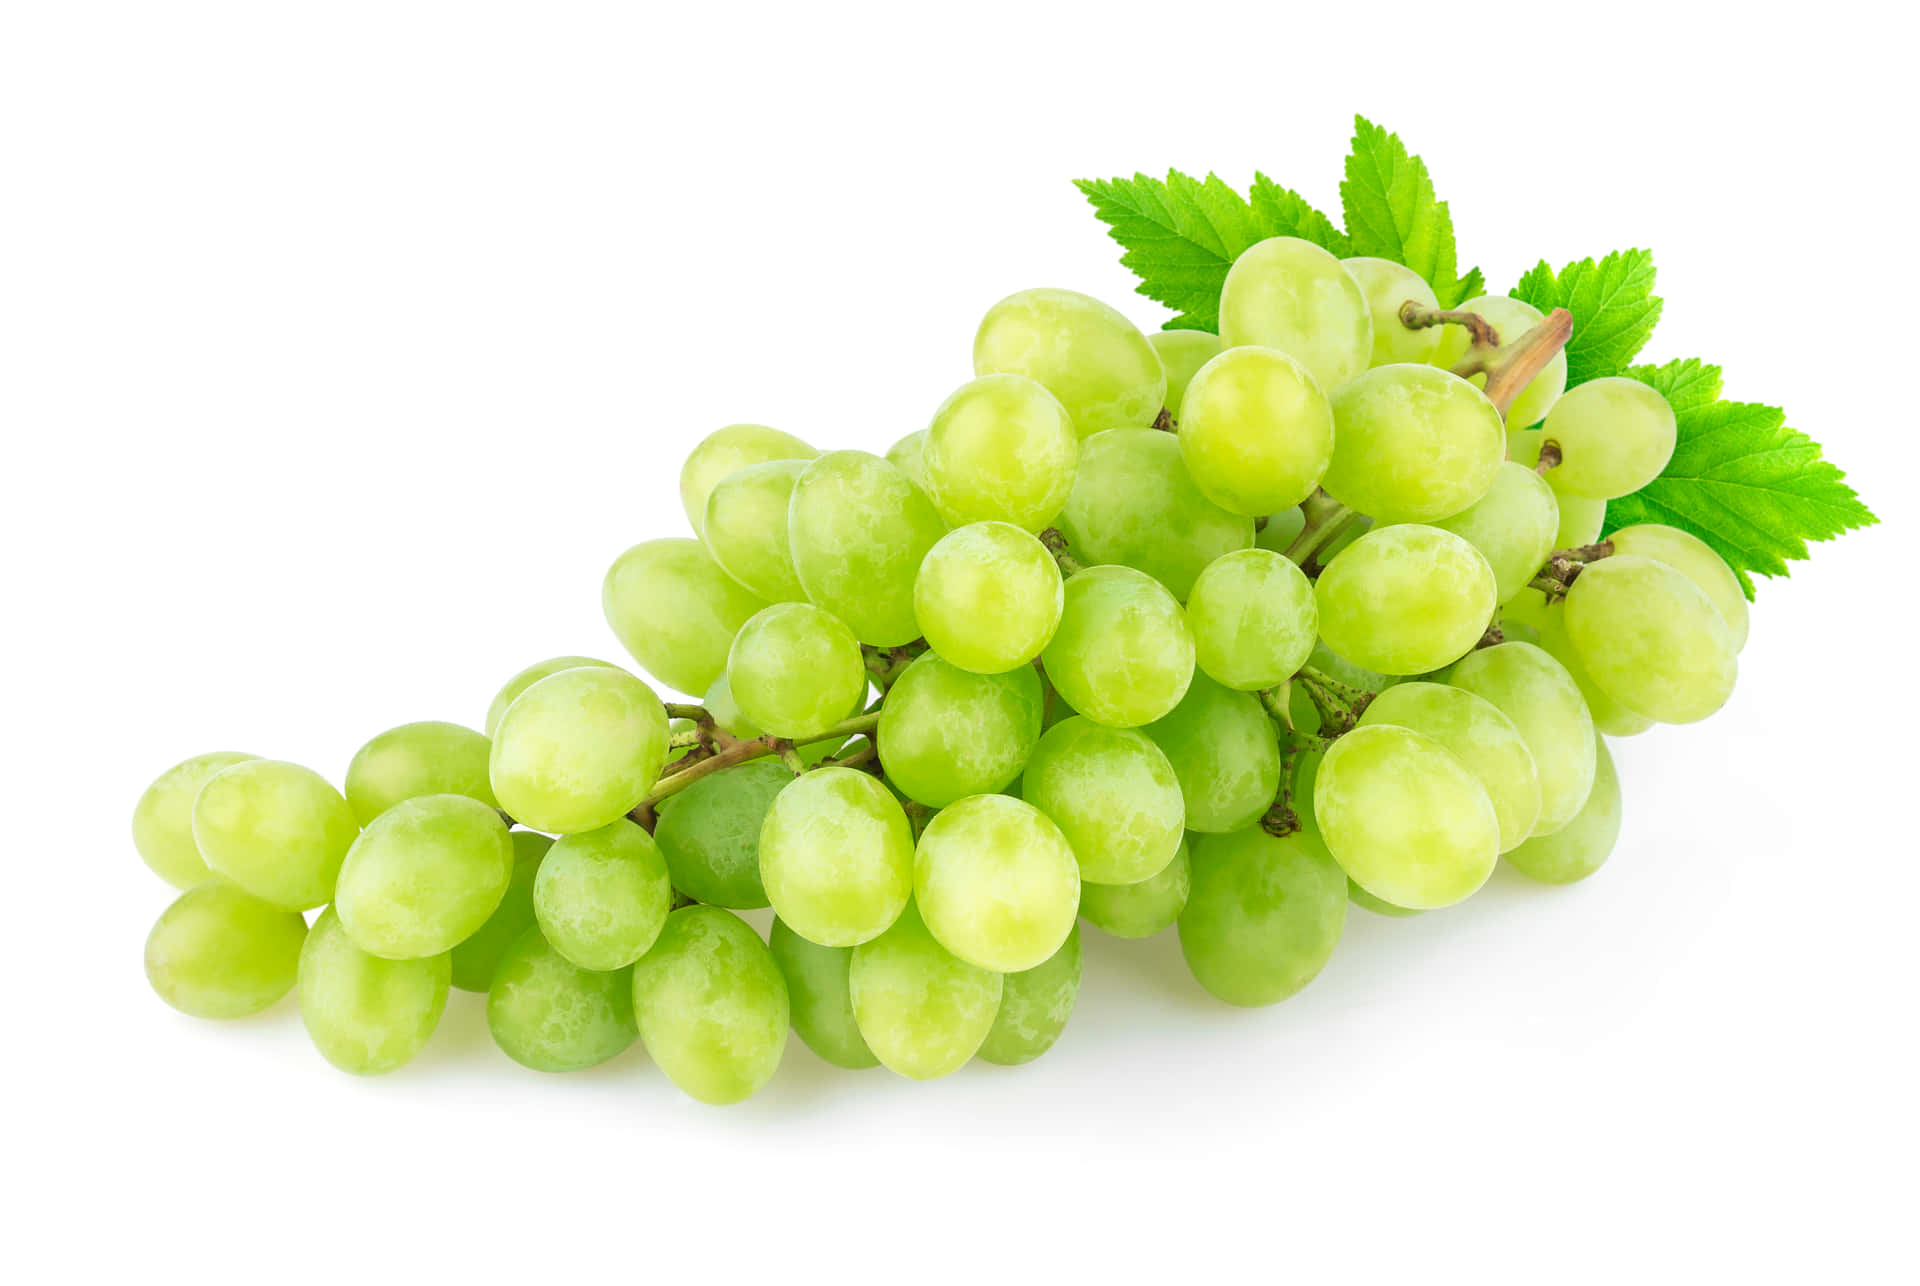 Download Grapes 4398 X 2945 Background | Wallpapers.com